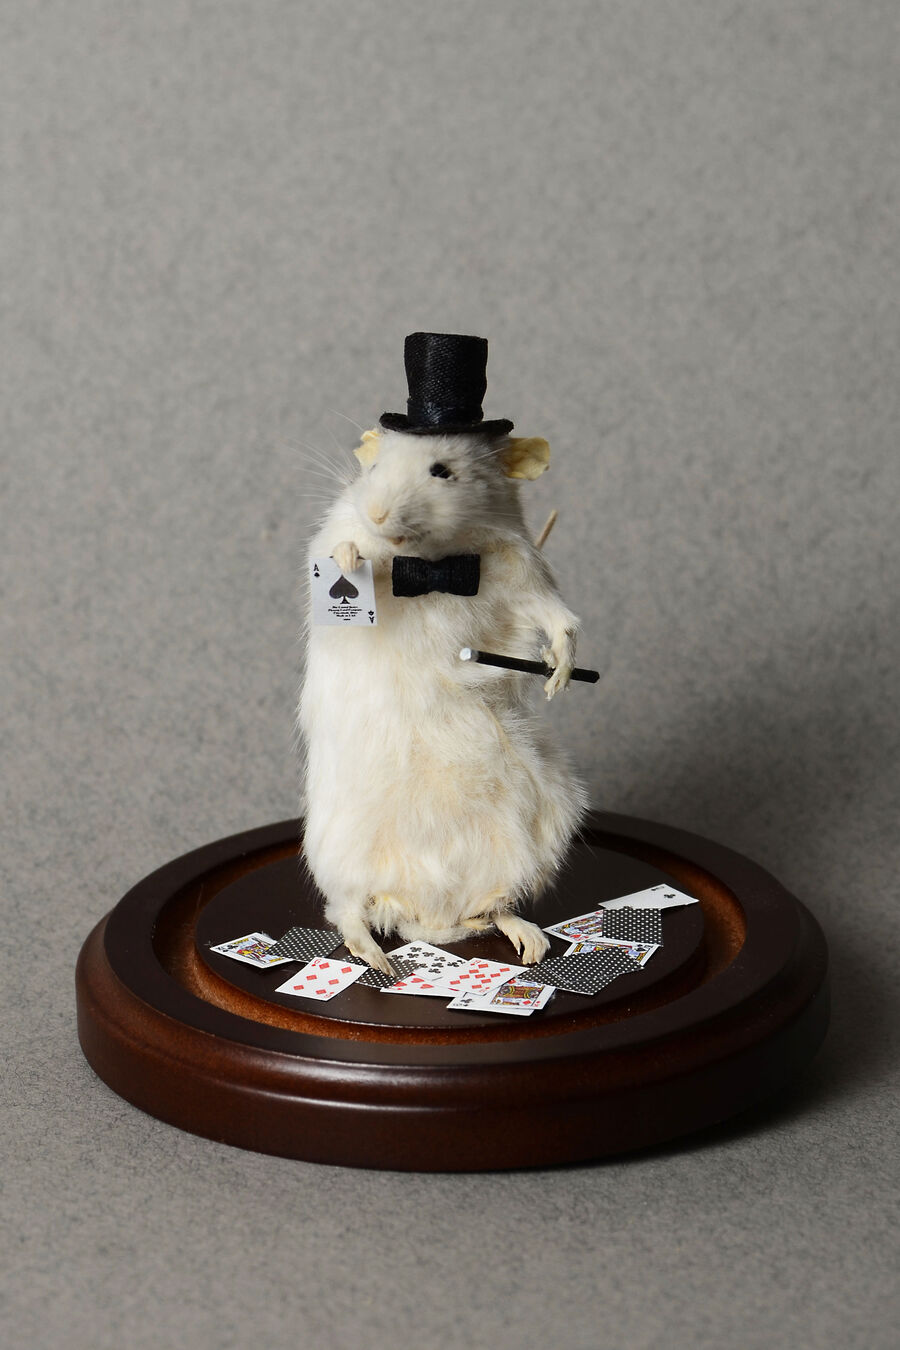 Inside the Eccentric World of Ethical Taxidermy Art | Artsy